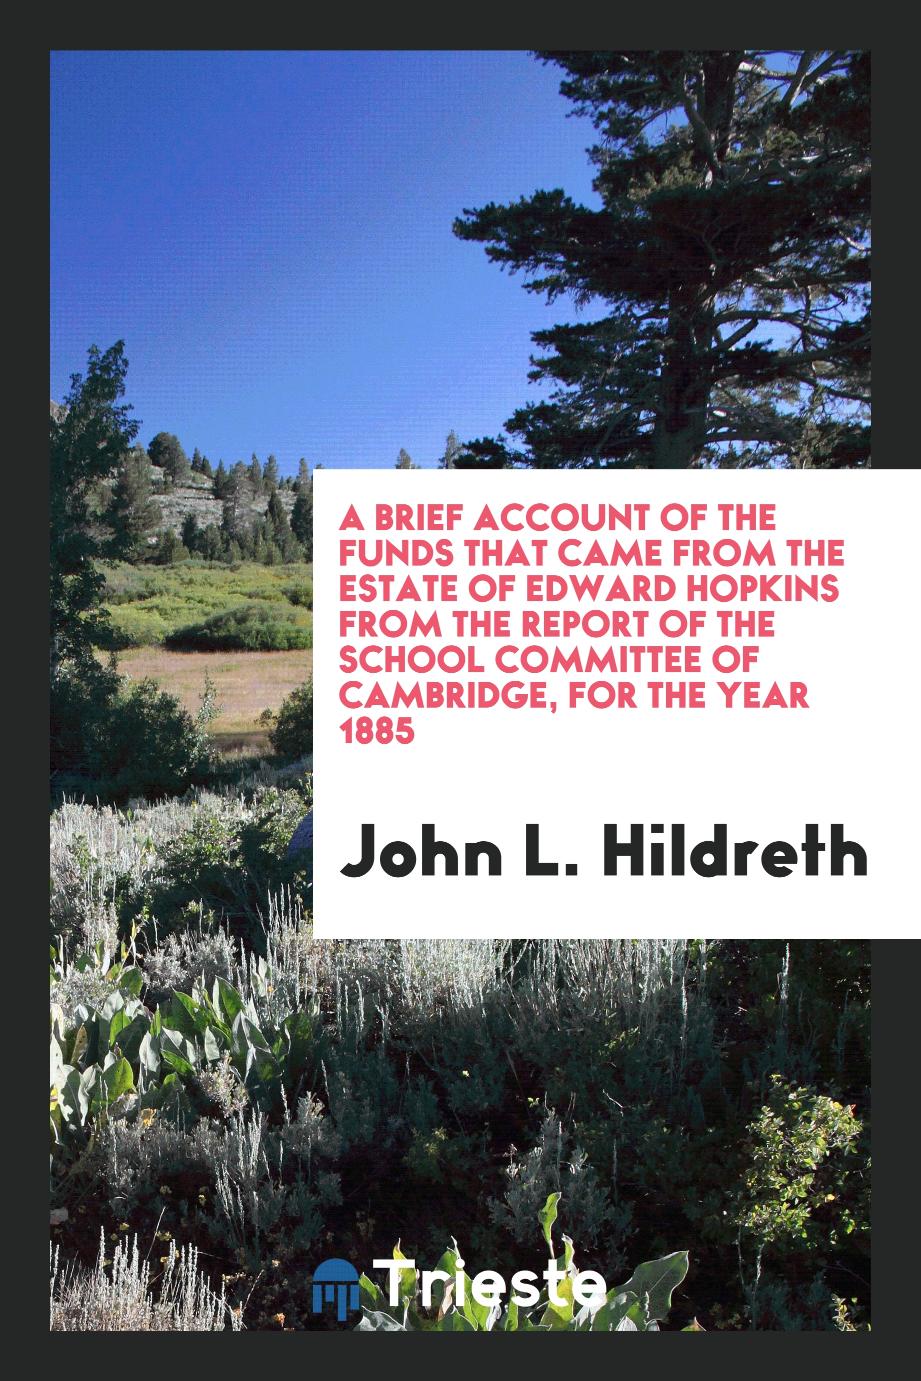 A Brief Account of the Funds that Came from the Estate of Edward Hopkins from the Report of the school committee of Cambridge, for the year 1885